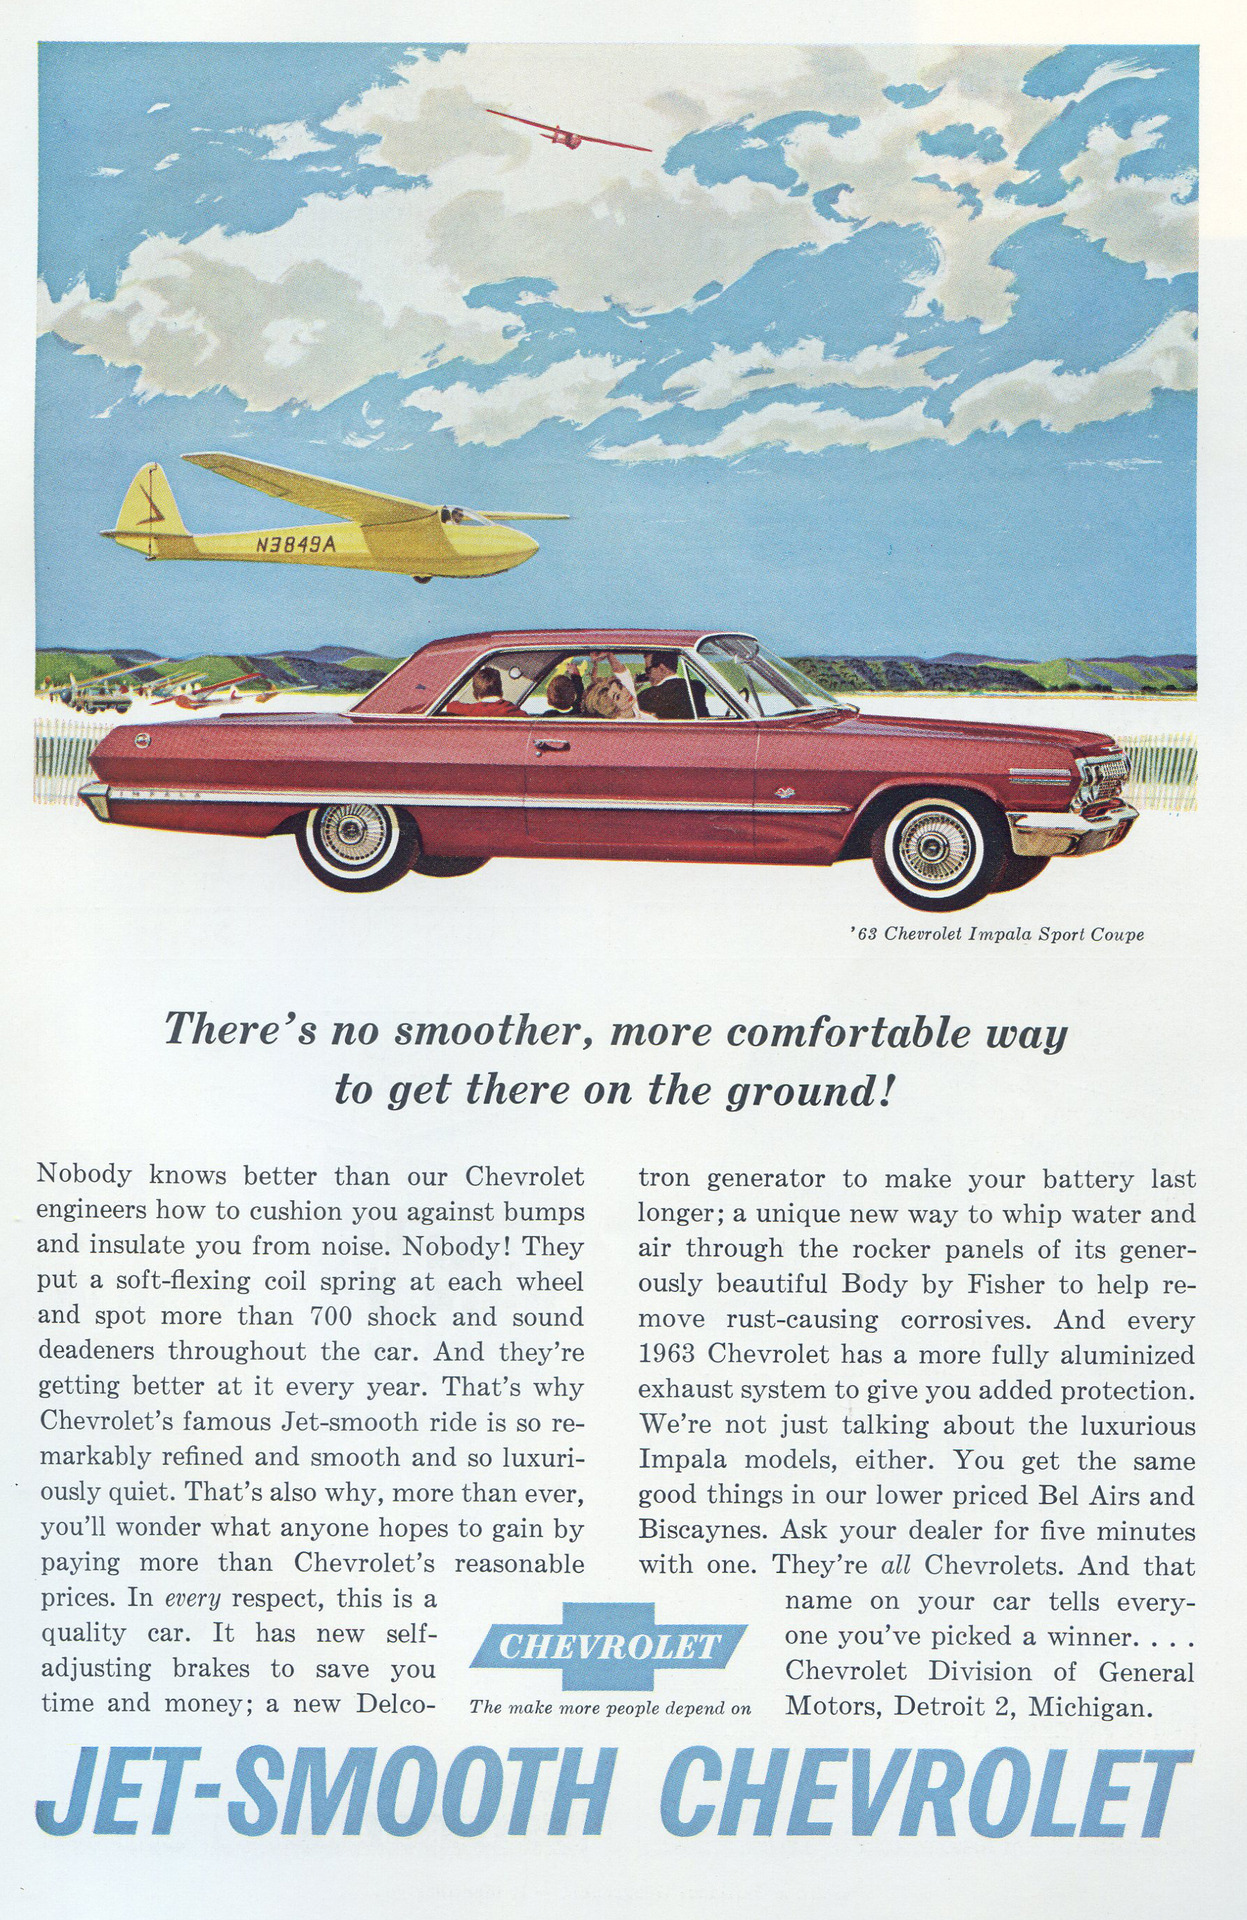 1963 Chevrolet Impala Sport Coupe - published in National Geographic - April 1963